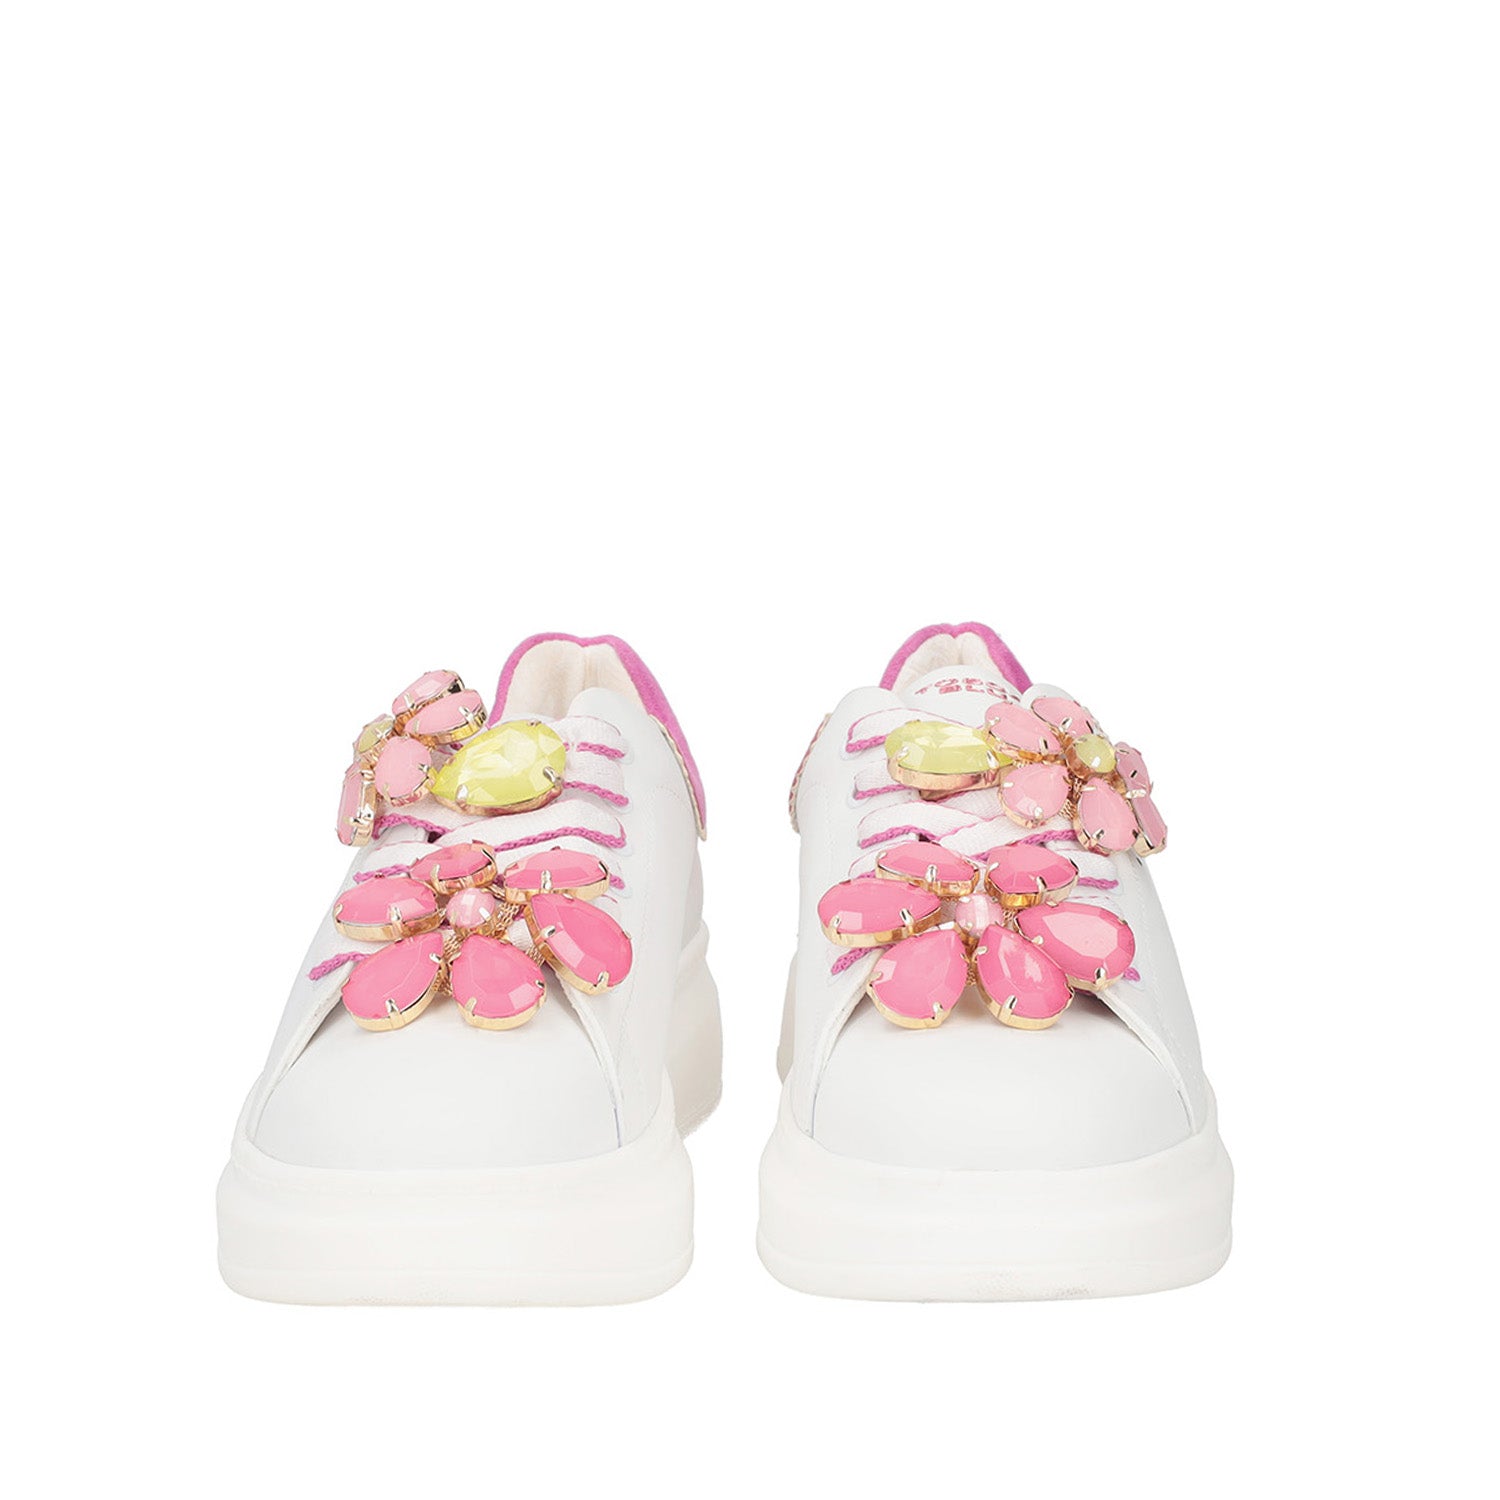 WHITE/FUXIA GLAMOUR SNEAKER IN LEATHER WITH JEWEL FLOWERS